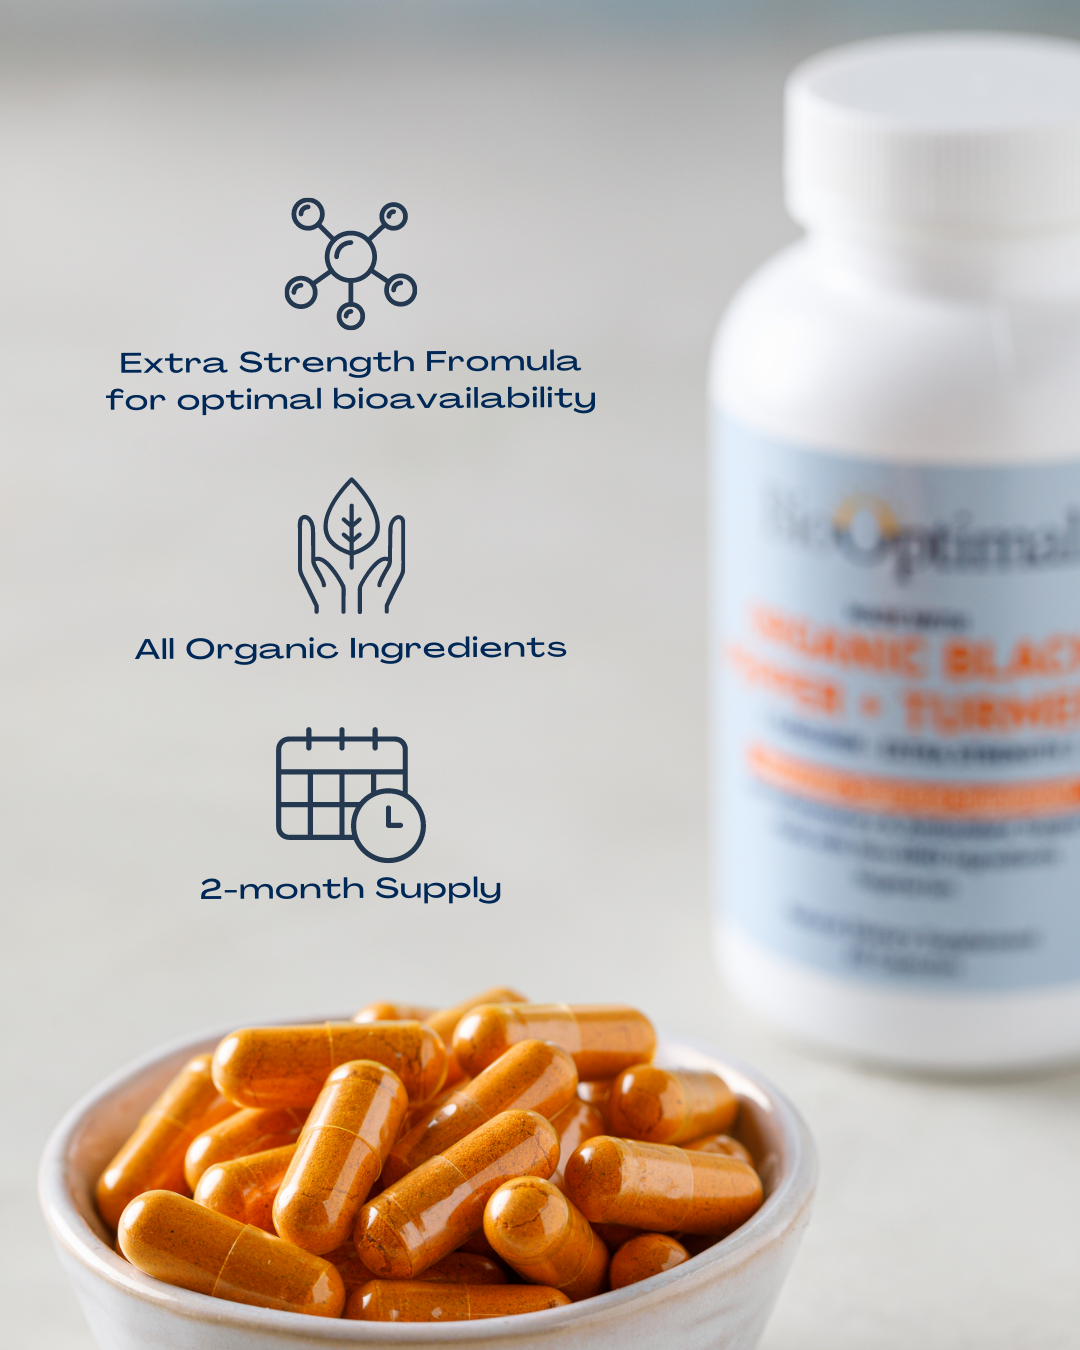 BioOptimal Organic Turmeric Supplement - Natural Joint Support Supplement with Turmeric and Black Pepper